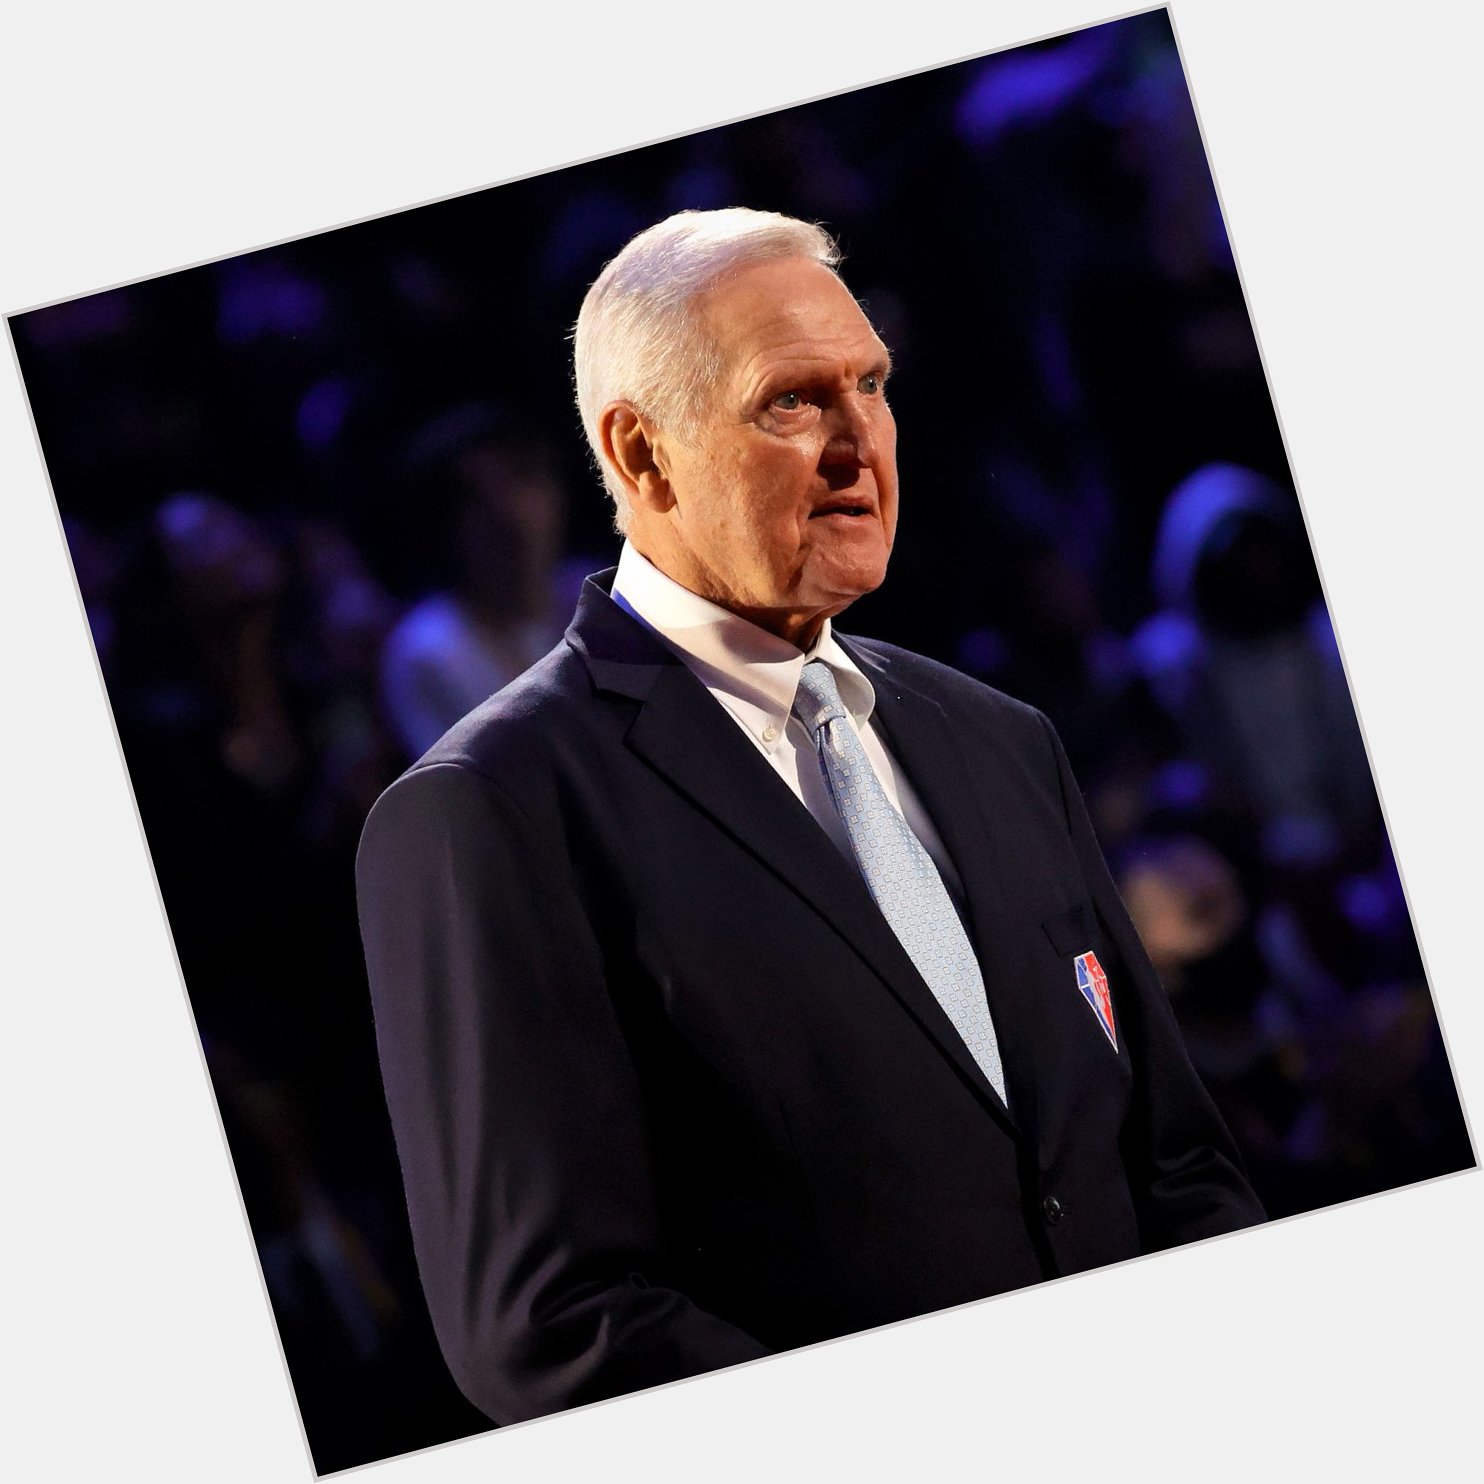 Join us in wishing a Happy Birthday to NBA legend, Jerry West   